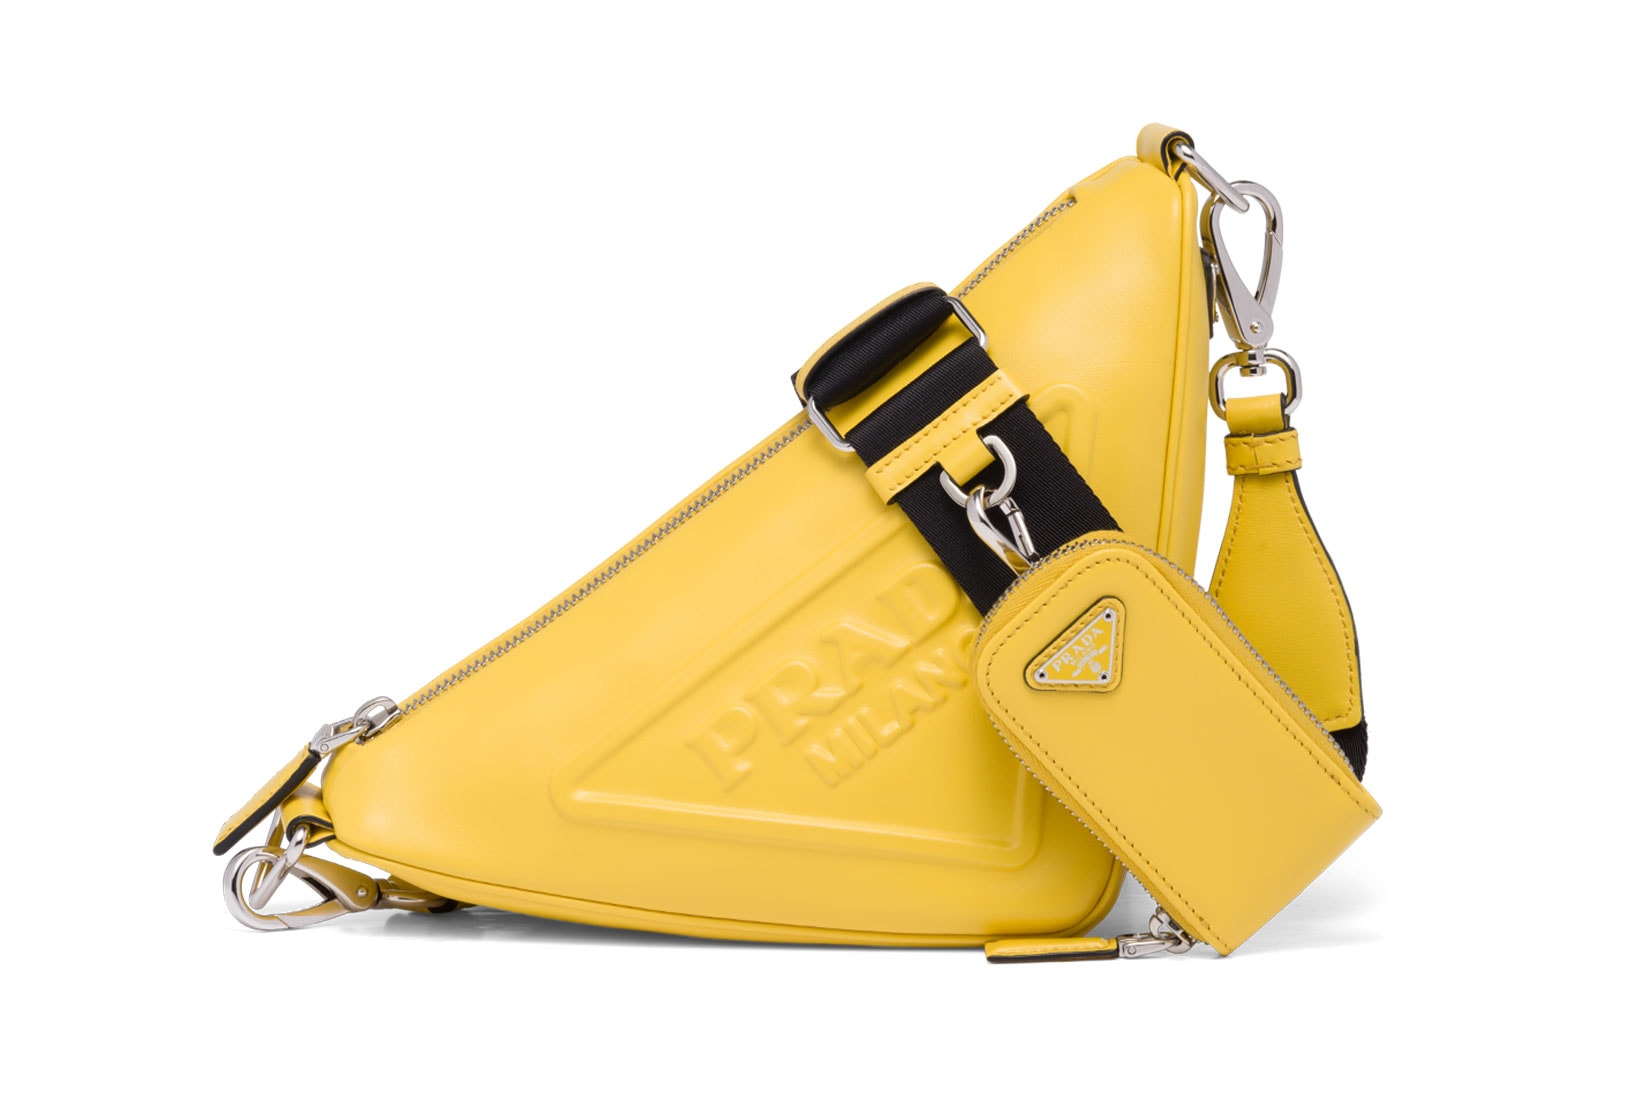 Anatomy of an Investment Piece: Prada's Re-Edition 2005 Bag